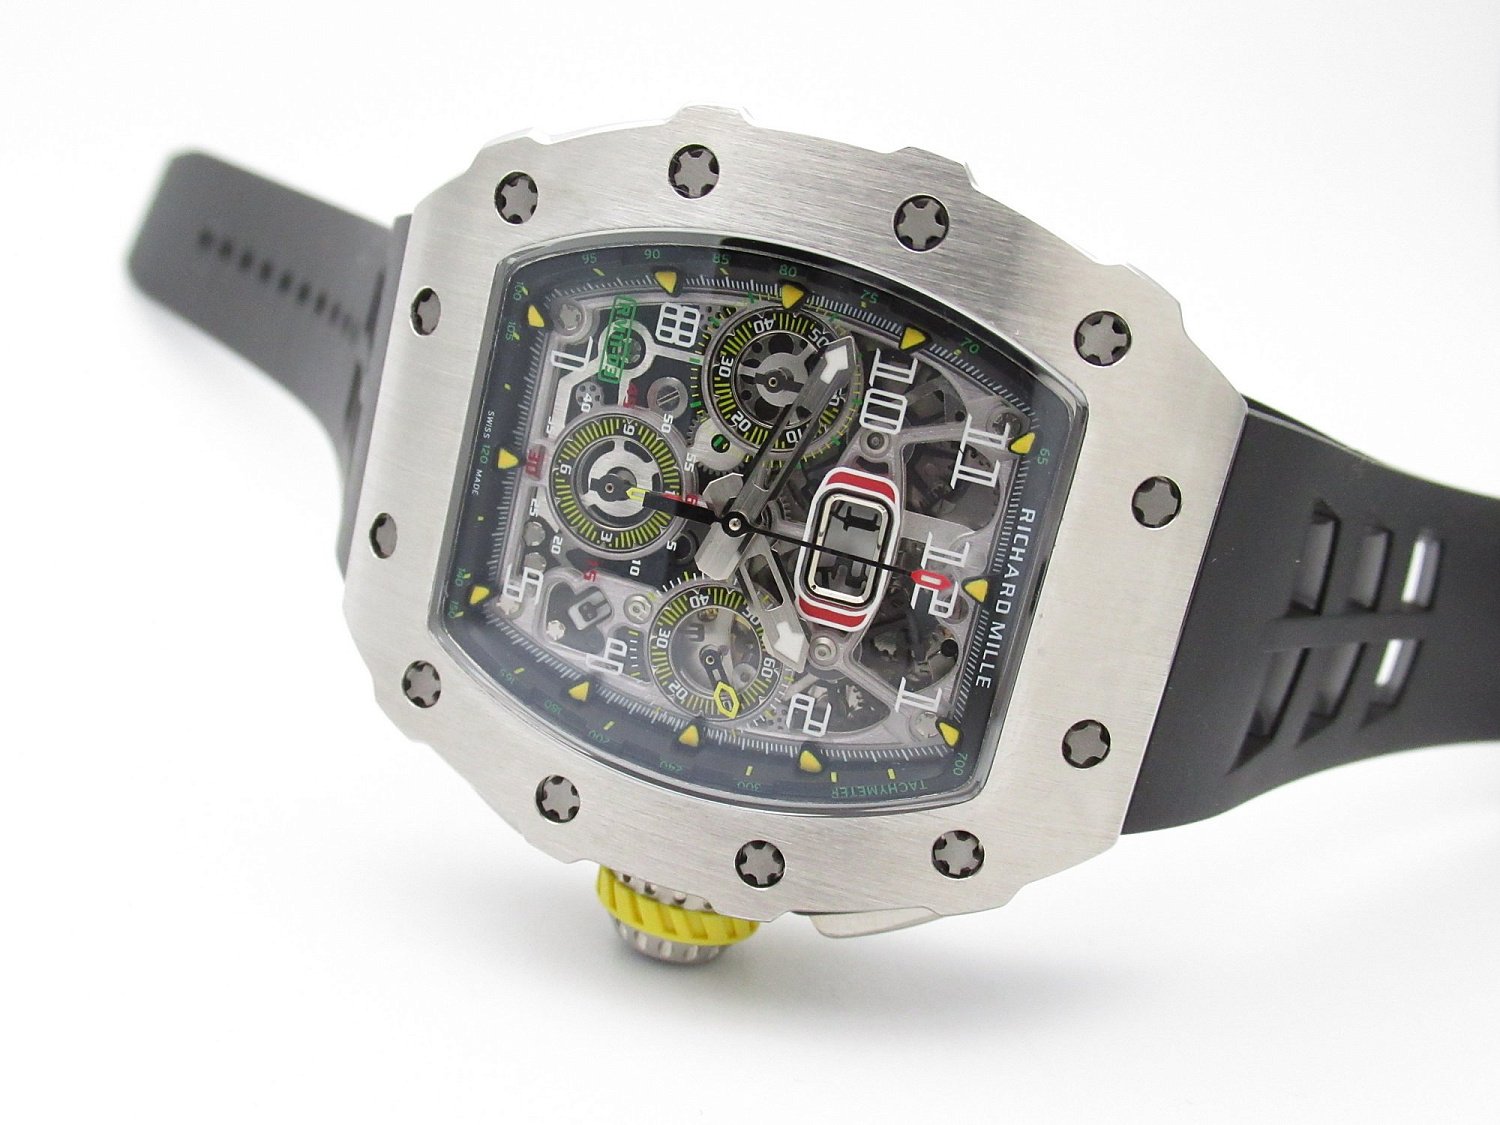 Richard Mille RM 011 Automatic Flyback Chronograph in Titanium on Black Rubber